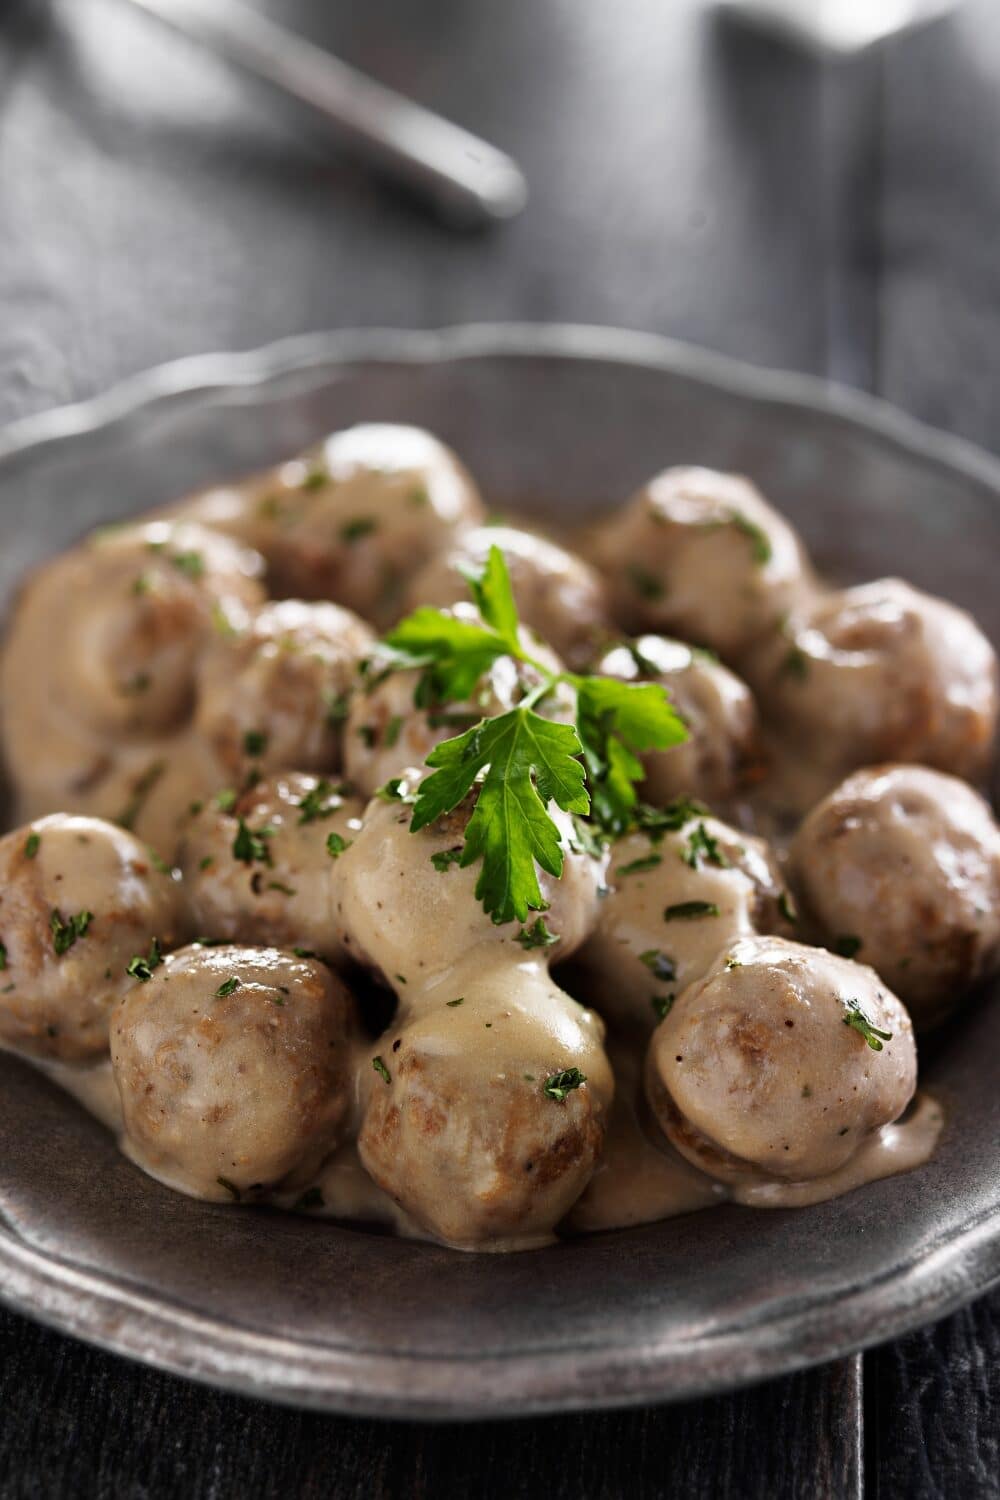 Swedish meatballs arranged elegantly on a plate, adorned with a garnish of fresh parsley. These tender and flavorful meatballs are a symphony of taste, featuring a delicate balance of seasoned ground meat and a creamy, savory sauce. The vibrant green parsley adds a touch of color and herbal freshness, inviting you to savor every bite of this beloved Swedish delicacy.